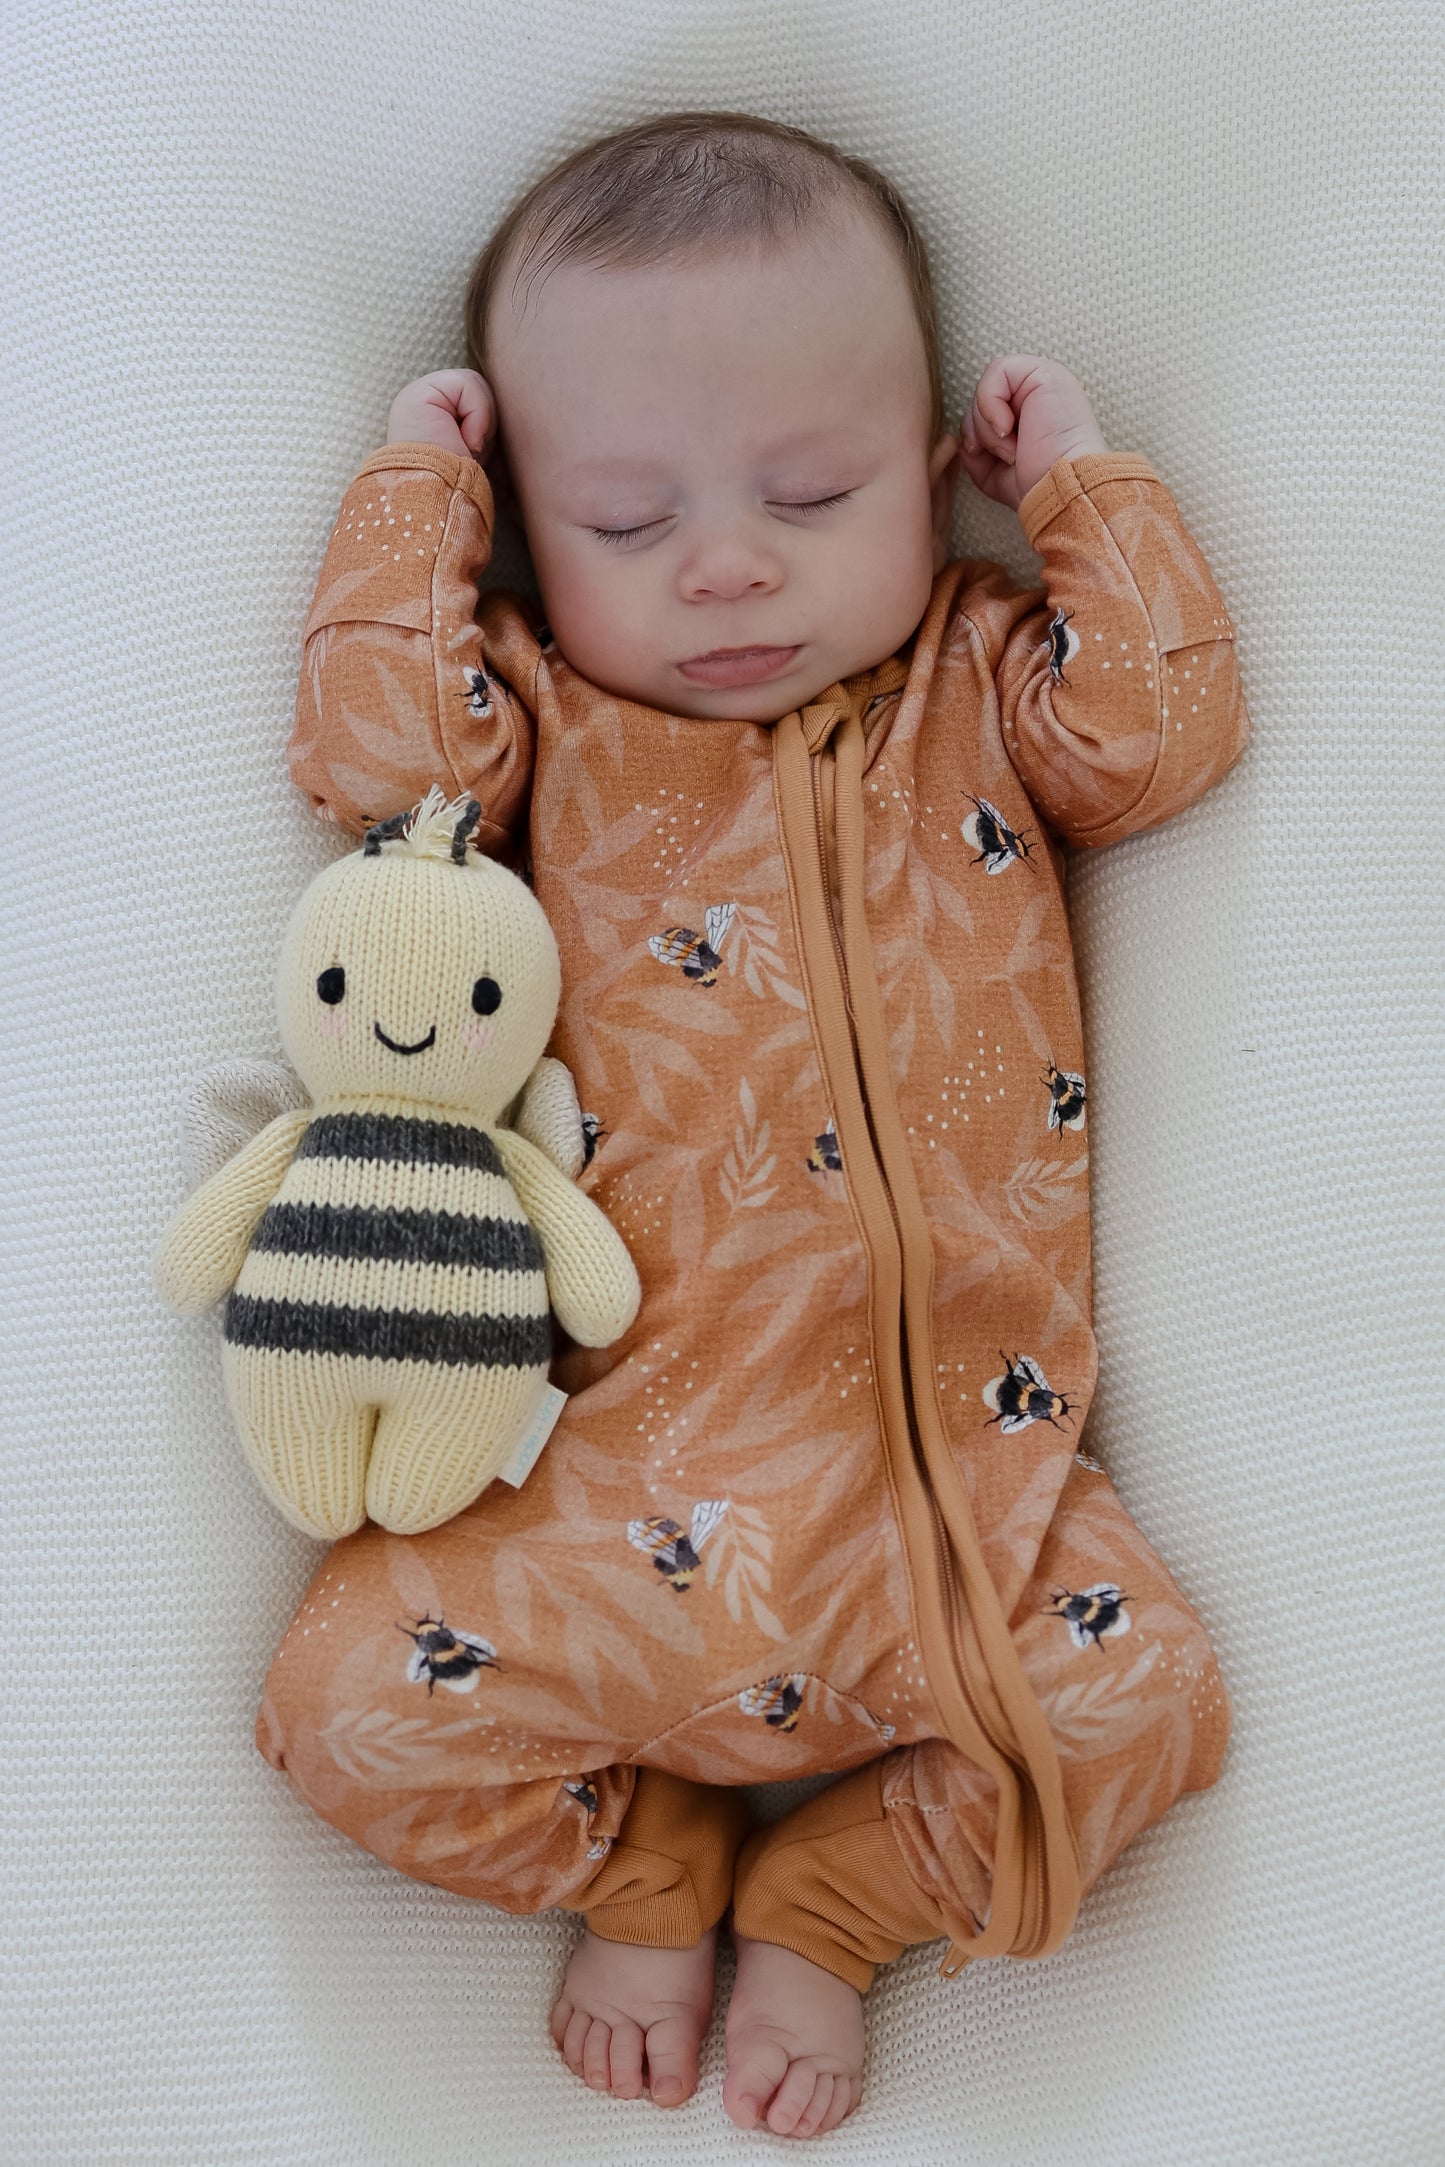 Bamboo Zipsuit - Bumble Bees